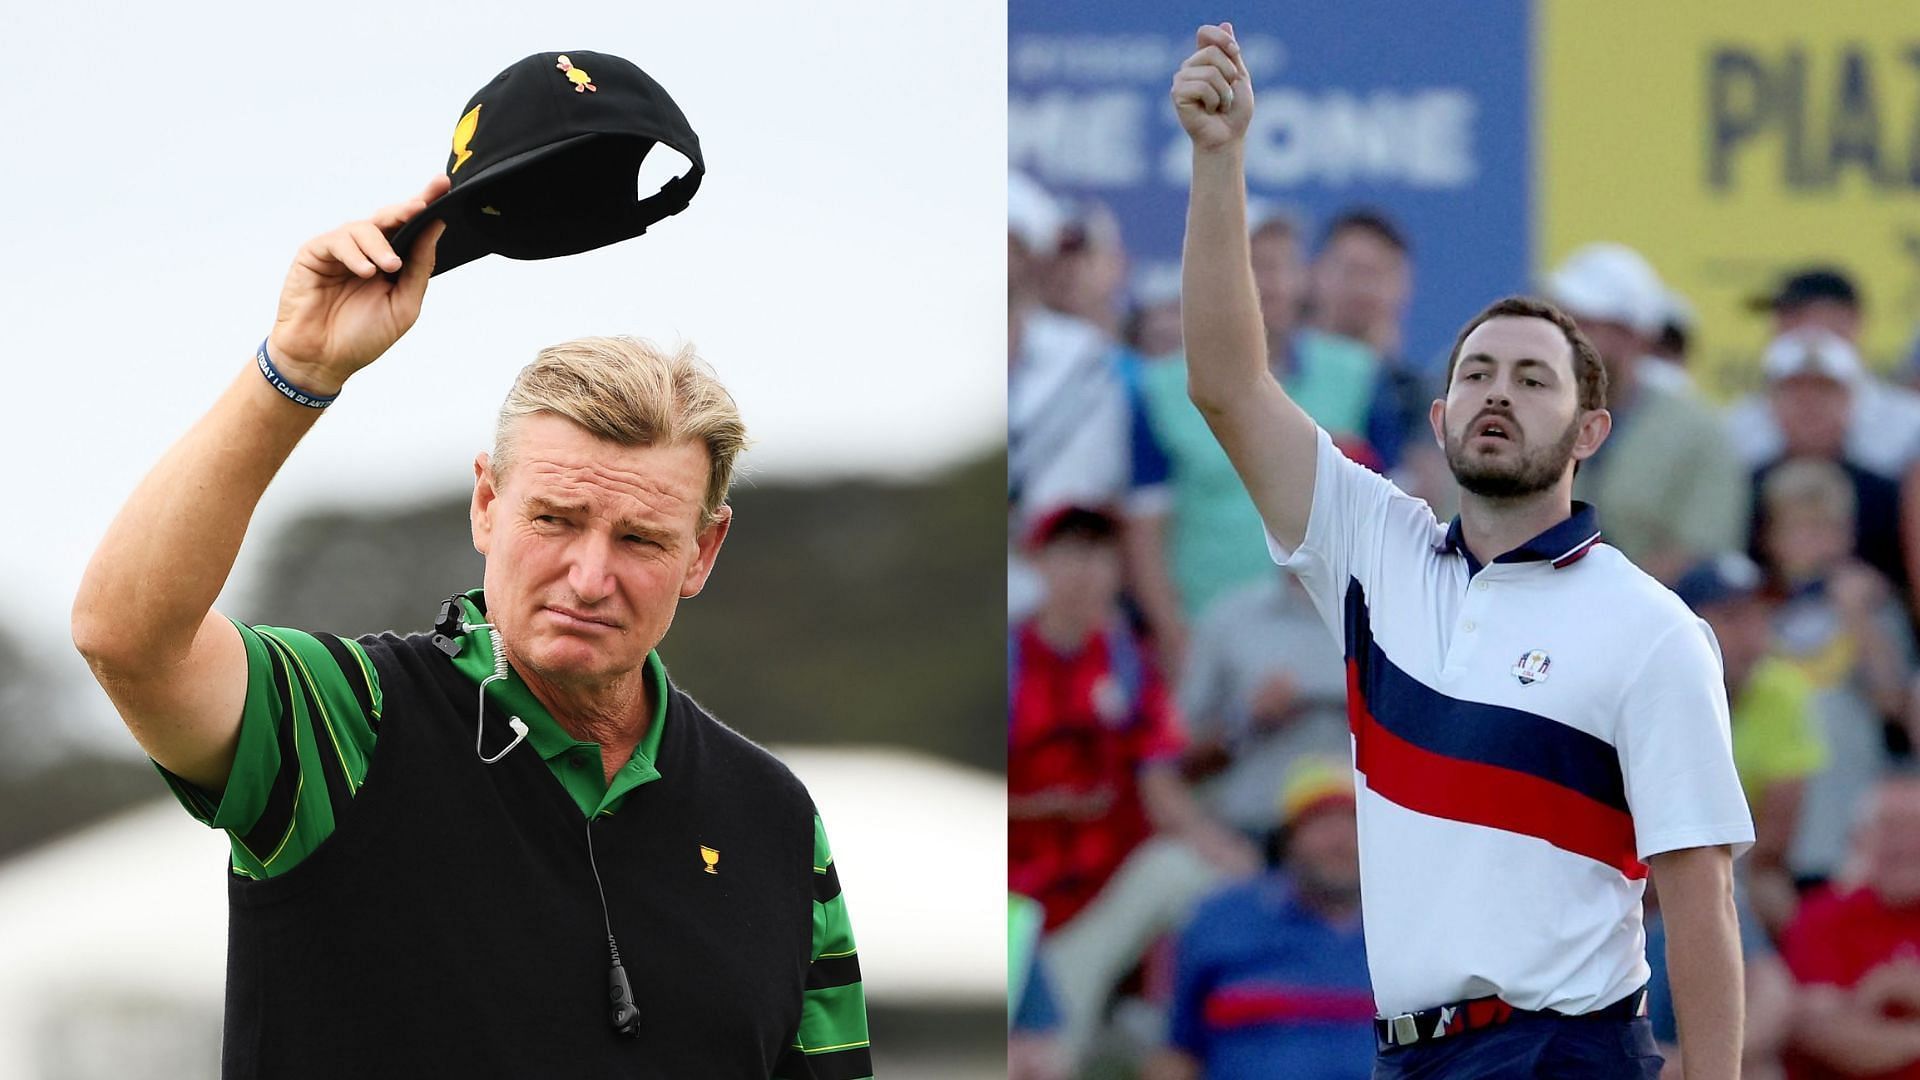 &ldquo;It&rsquo;s all about pride&rdquo;: 4x Major winner Ernie Els claims Ryder Cup should not be about pay after Patrick Cantlay&rsquo;s &lsquo;hat reports&rsquo; (Images via Getty)